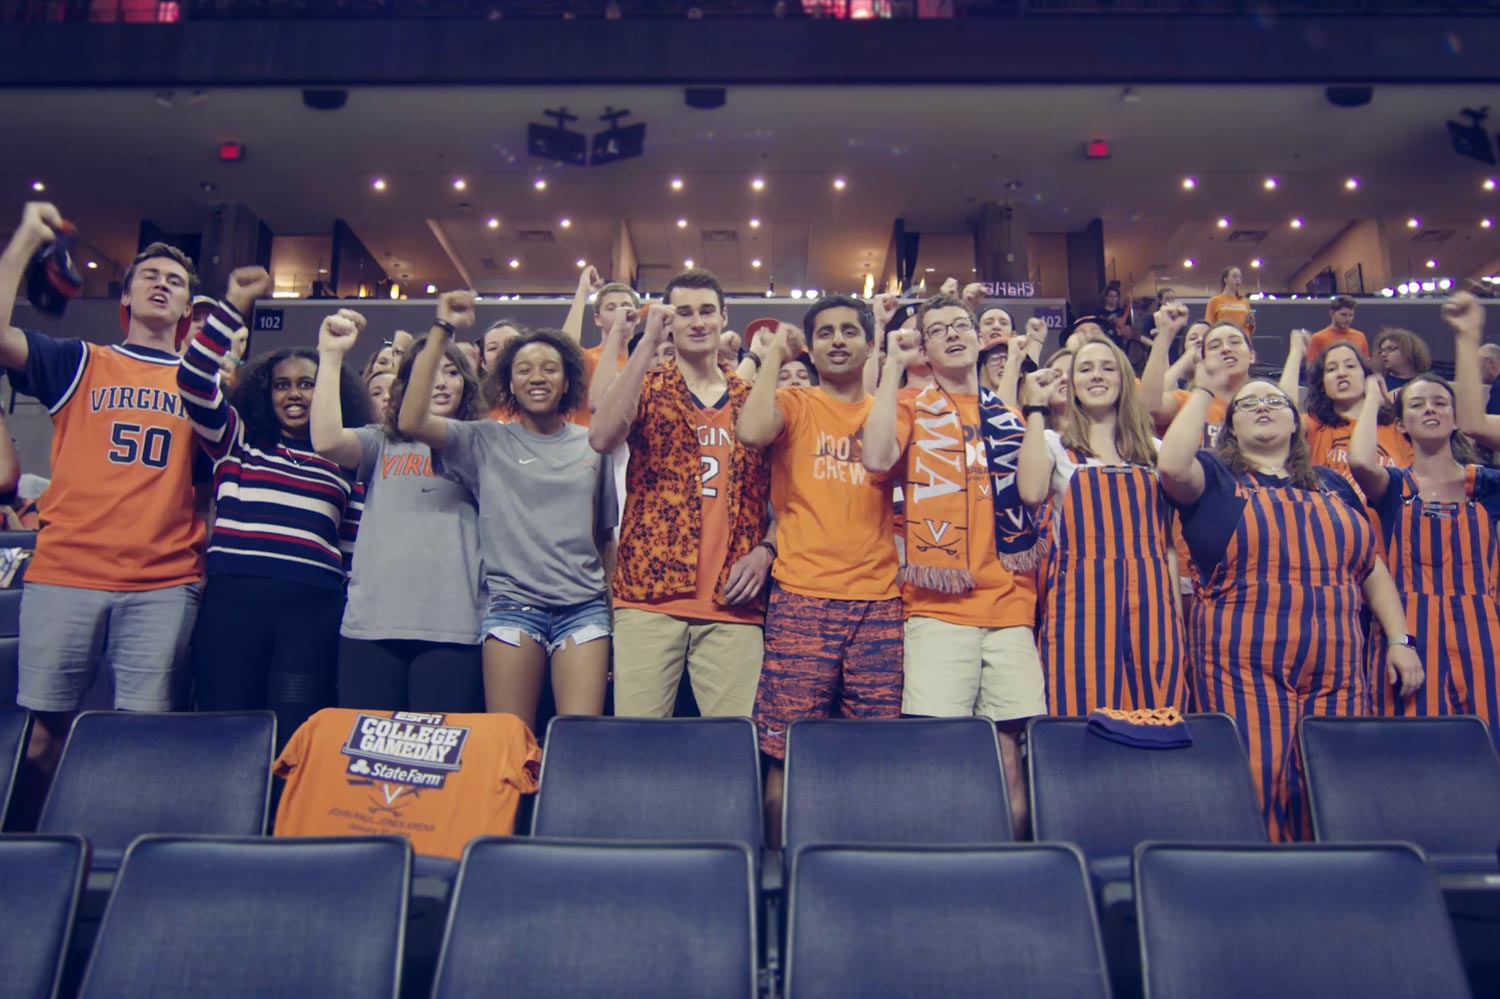 The Hoo Crew cheering during a basketball game